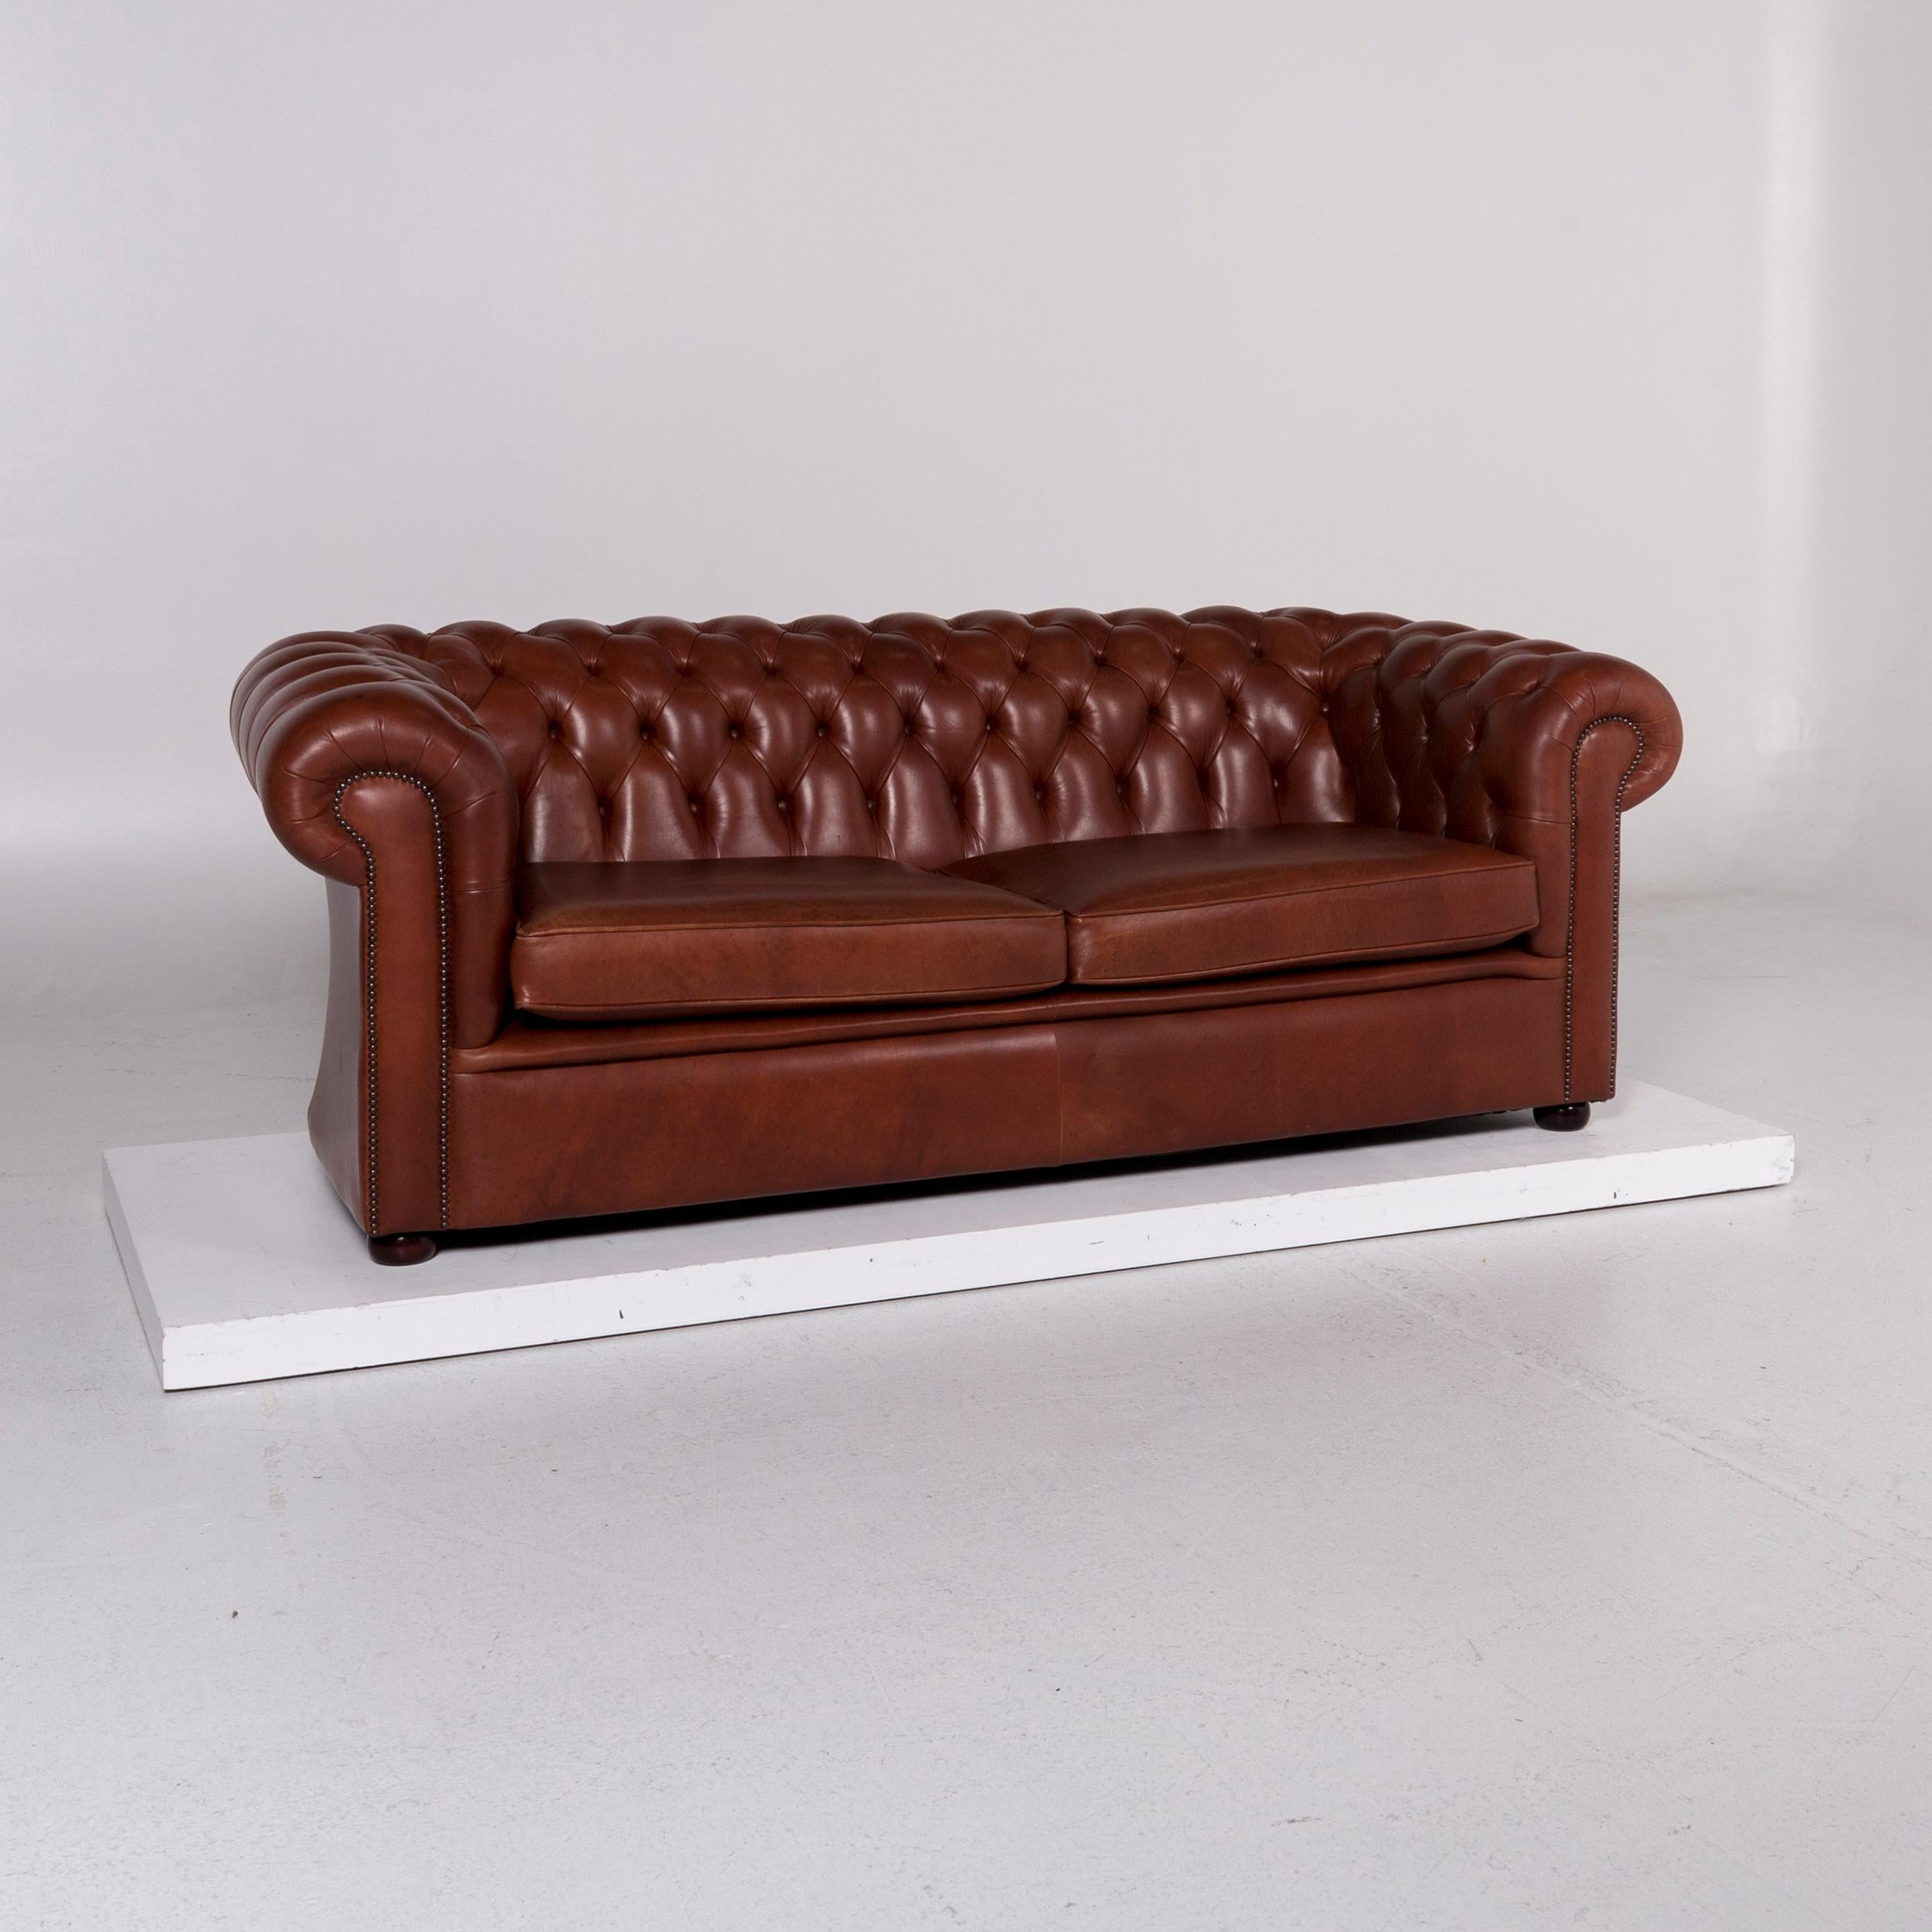 We bring to you a Chesterfield leather sofa red brown three-seat couch retro.
 
 Product measurements in centimeters:
 
 Depth 97
 Width 220
 Height 84
 Seat-height 48
 Rest-height 80
 Seat-depth 61
 Seat-width 150
 Back-height 37.
  